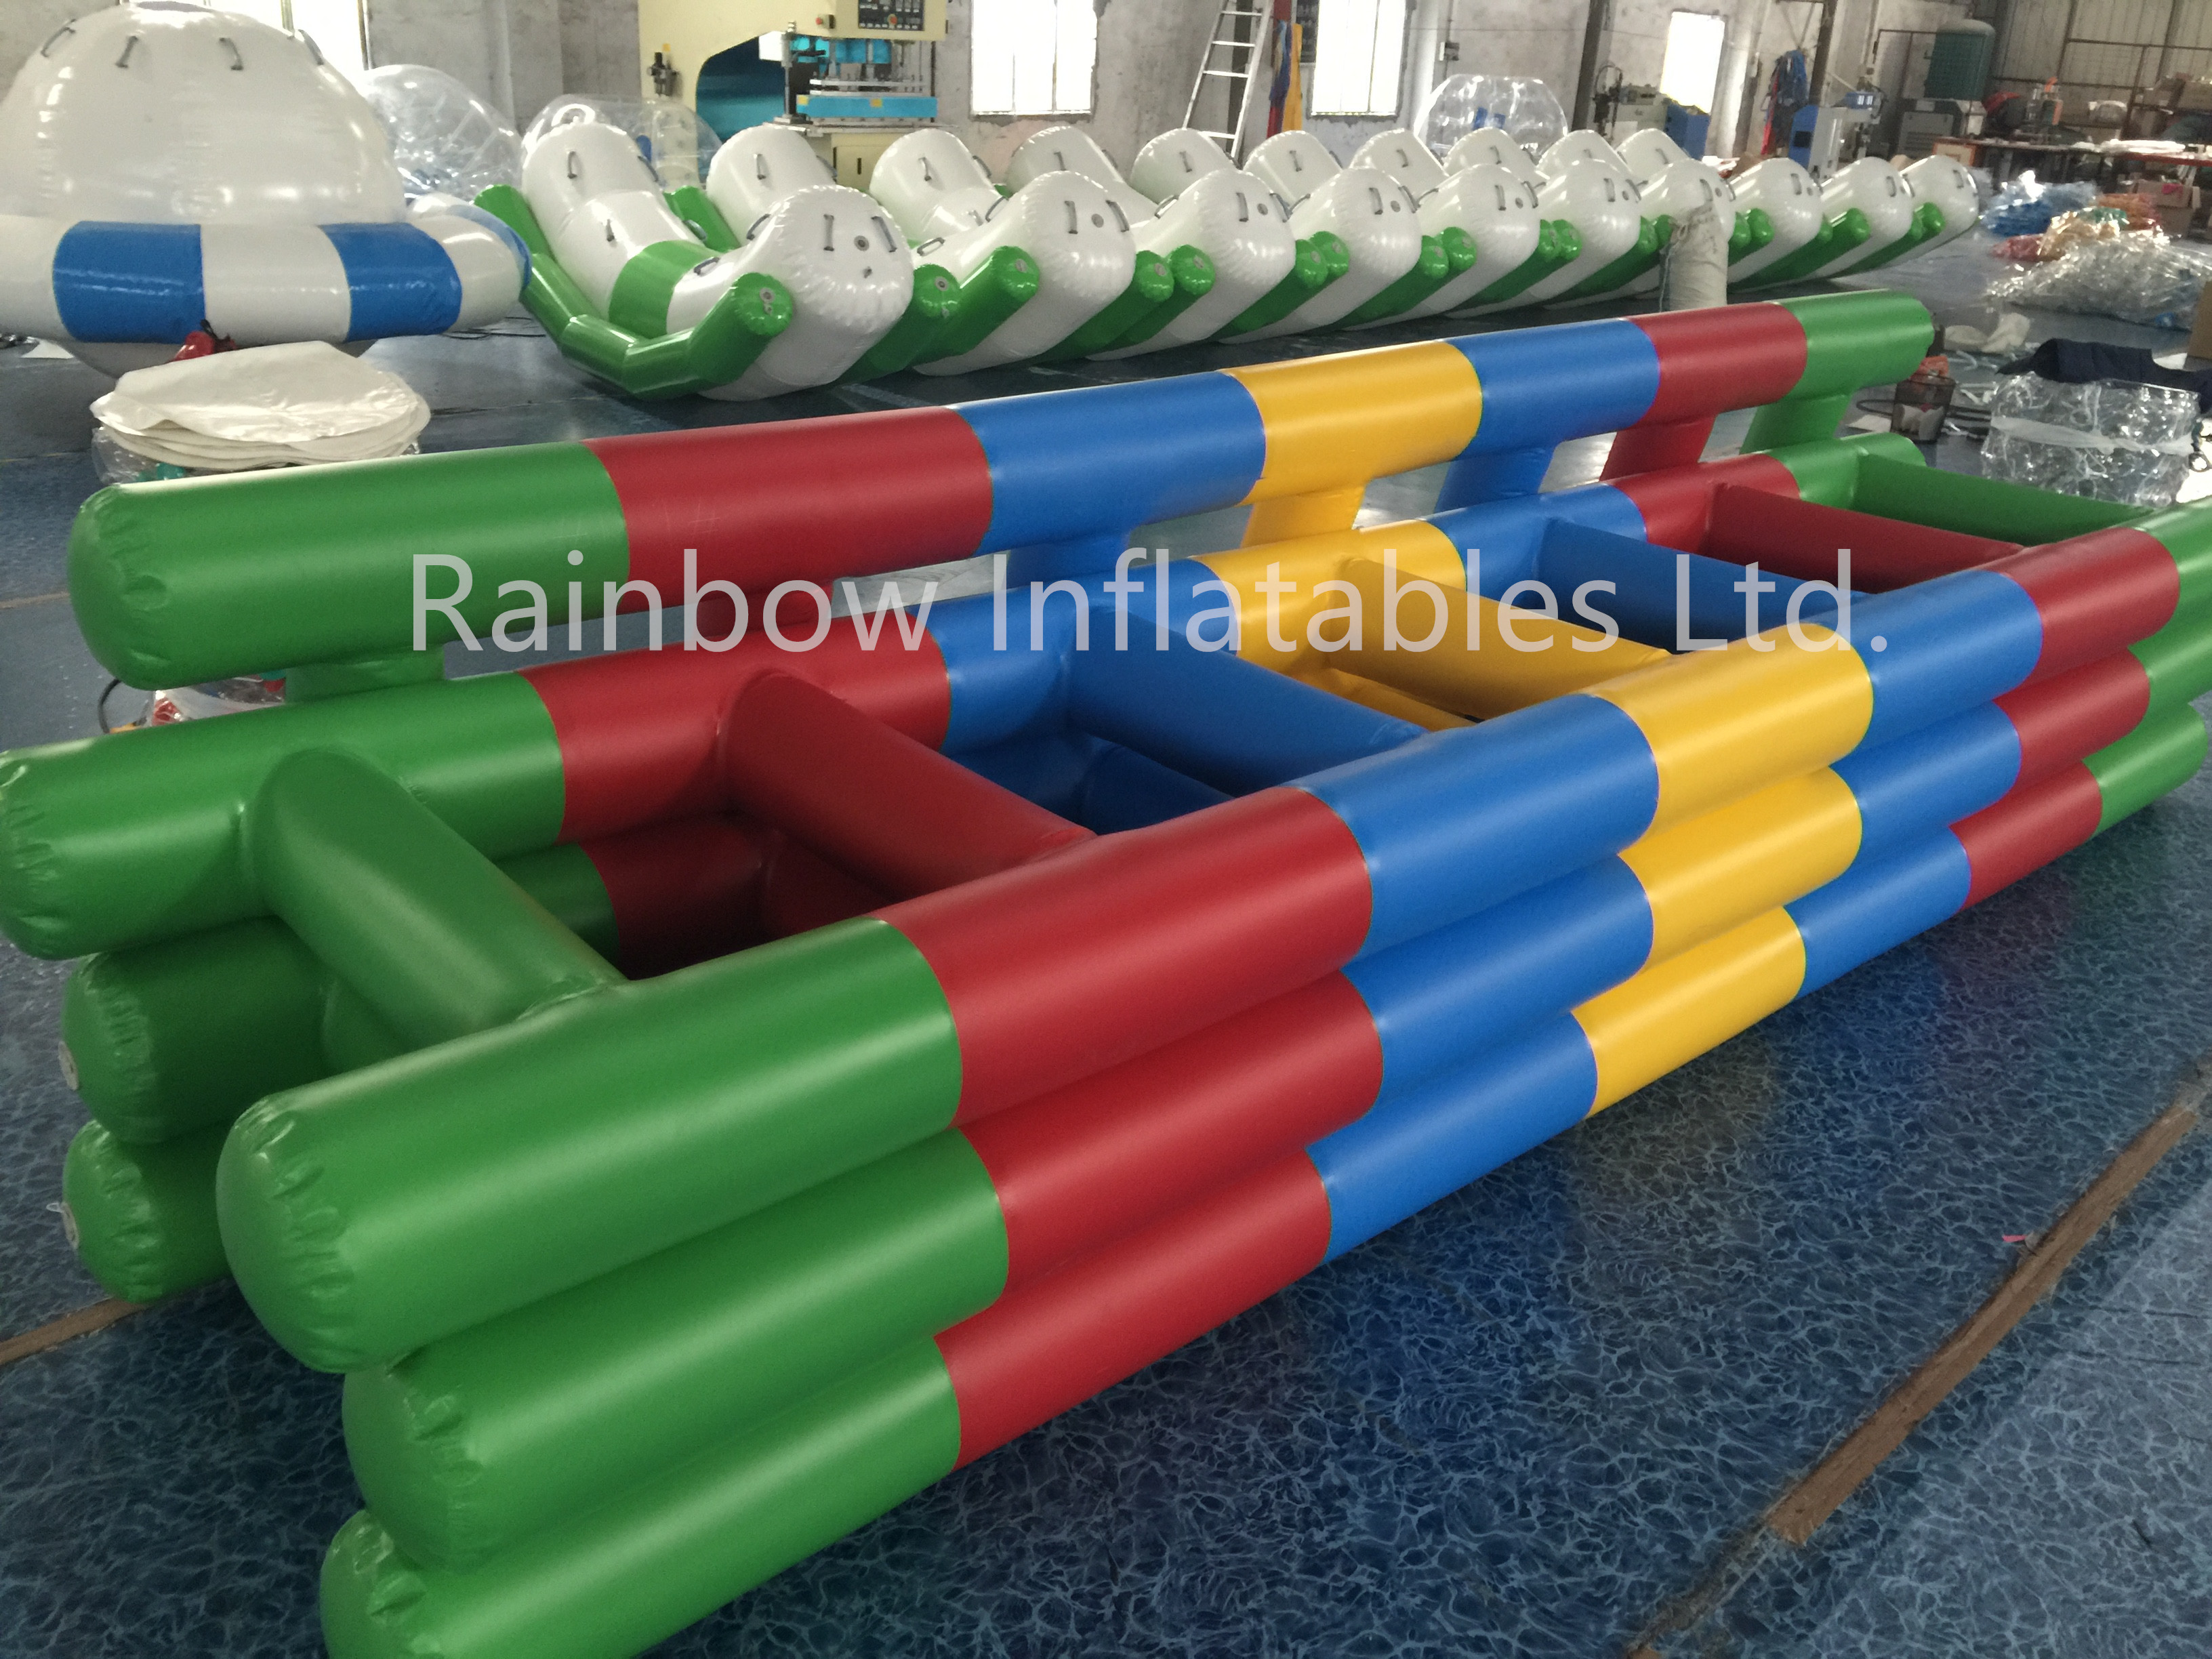 Small Outdoor Durable Inflatable Ladder Water Game Water Toys for Kids